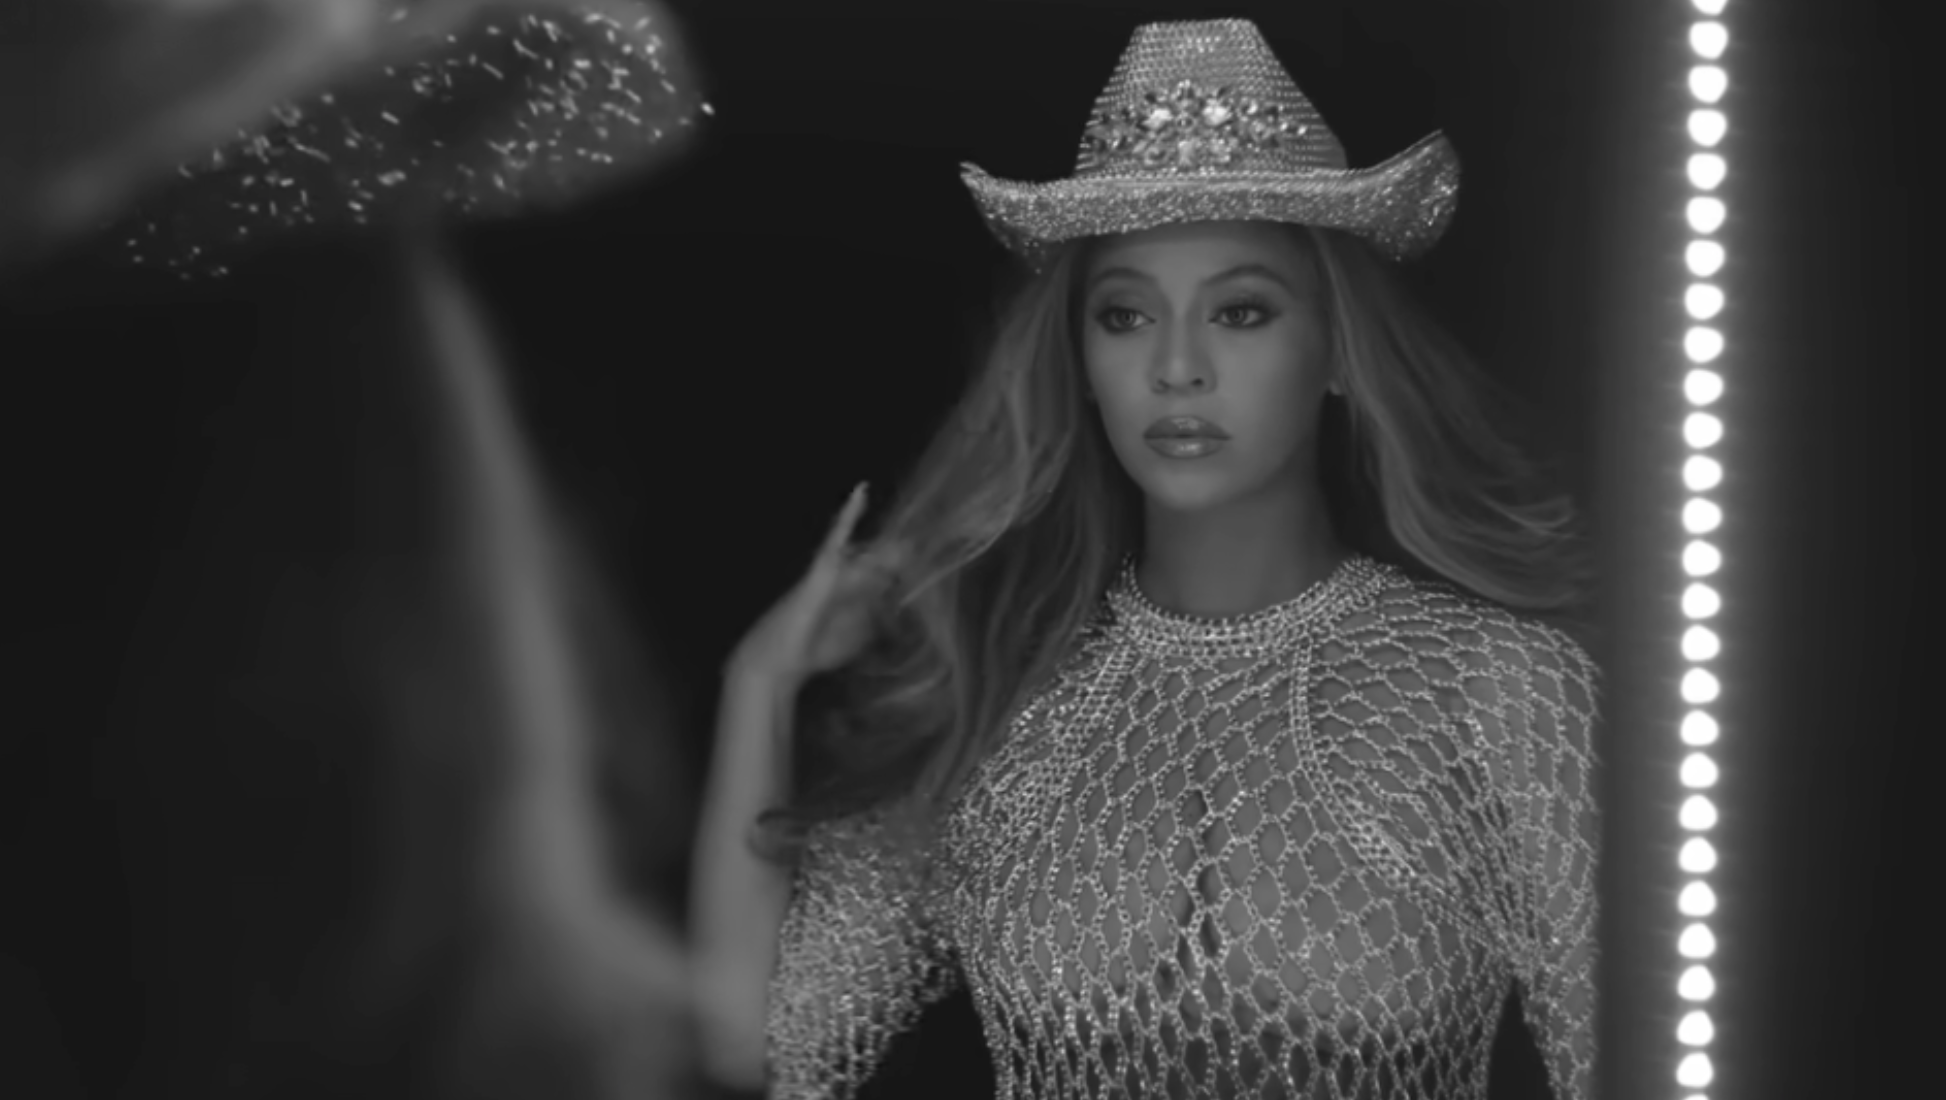 Beyoncé’s latest album is not classified as country music